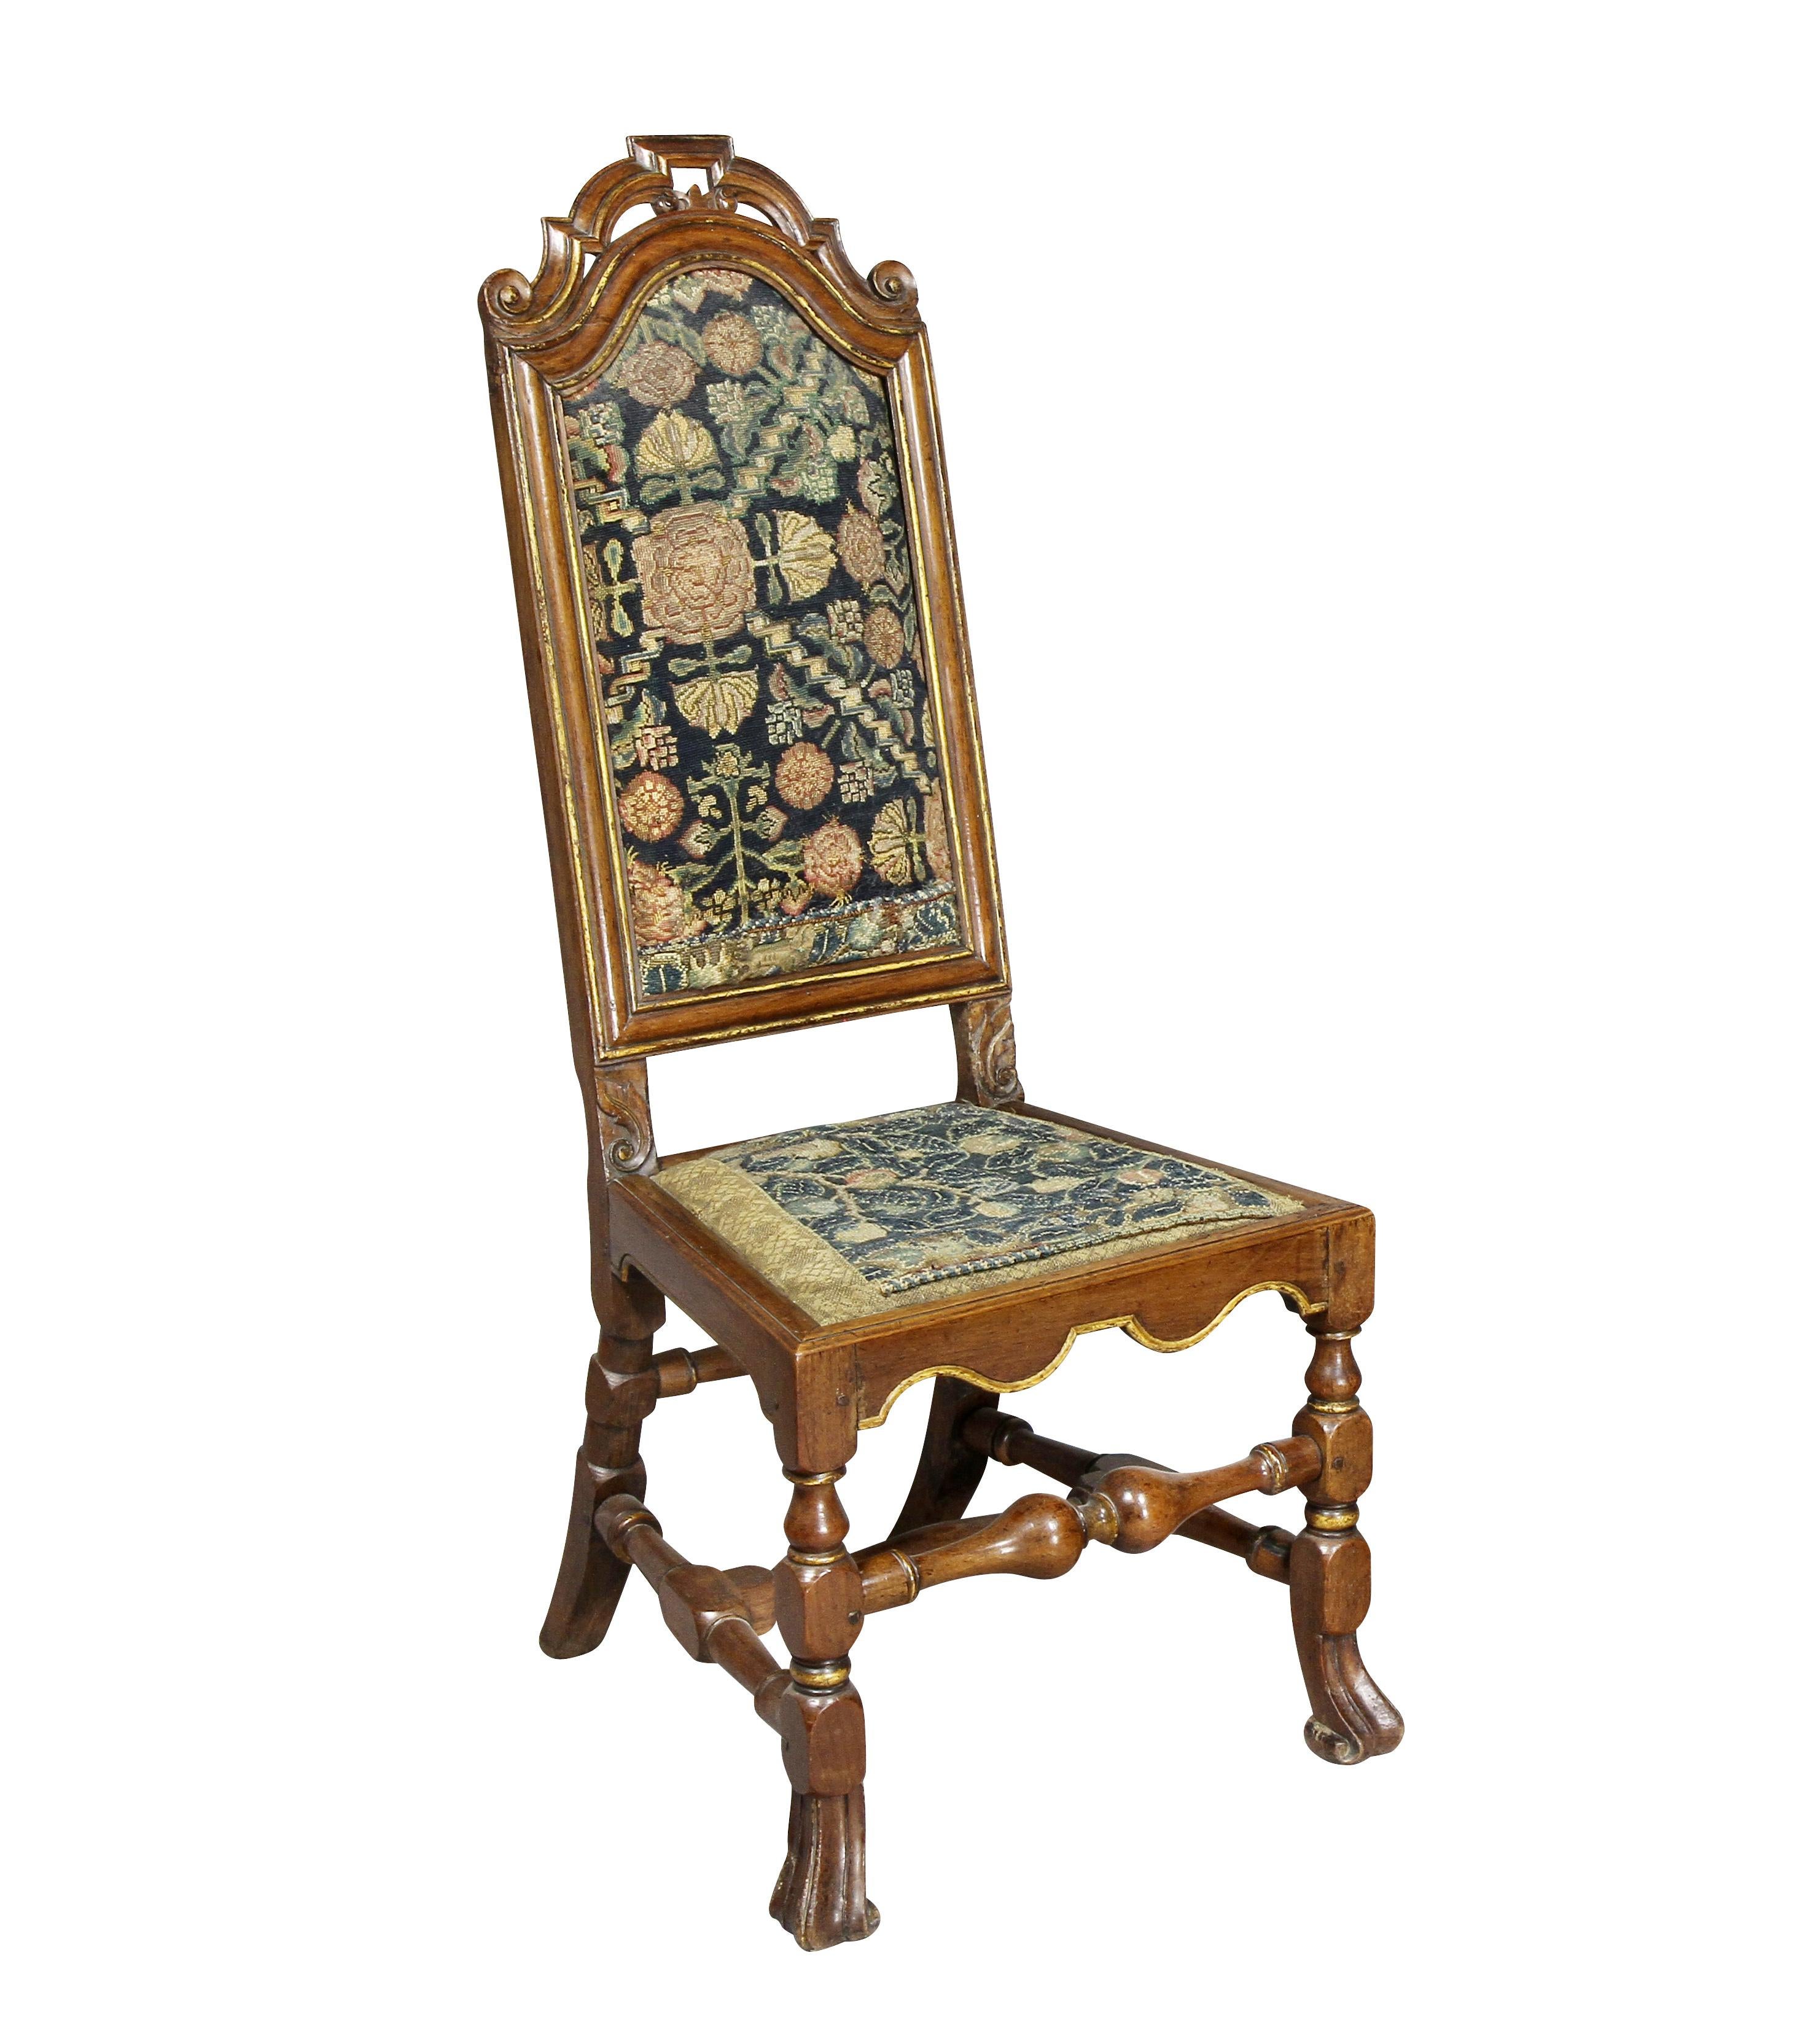 Each with a shaped, carved and pierced crest rail over period needlepoint seats and backs raised on block and turned legs and Spanish feet.
Provenance, Lucy Johnson antiques, London. Purchase price 14,000.